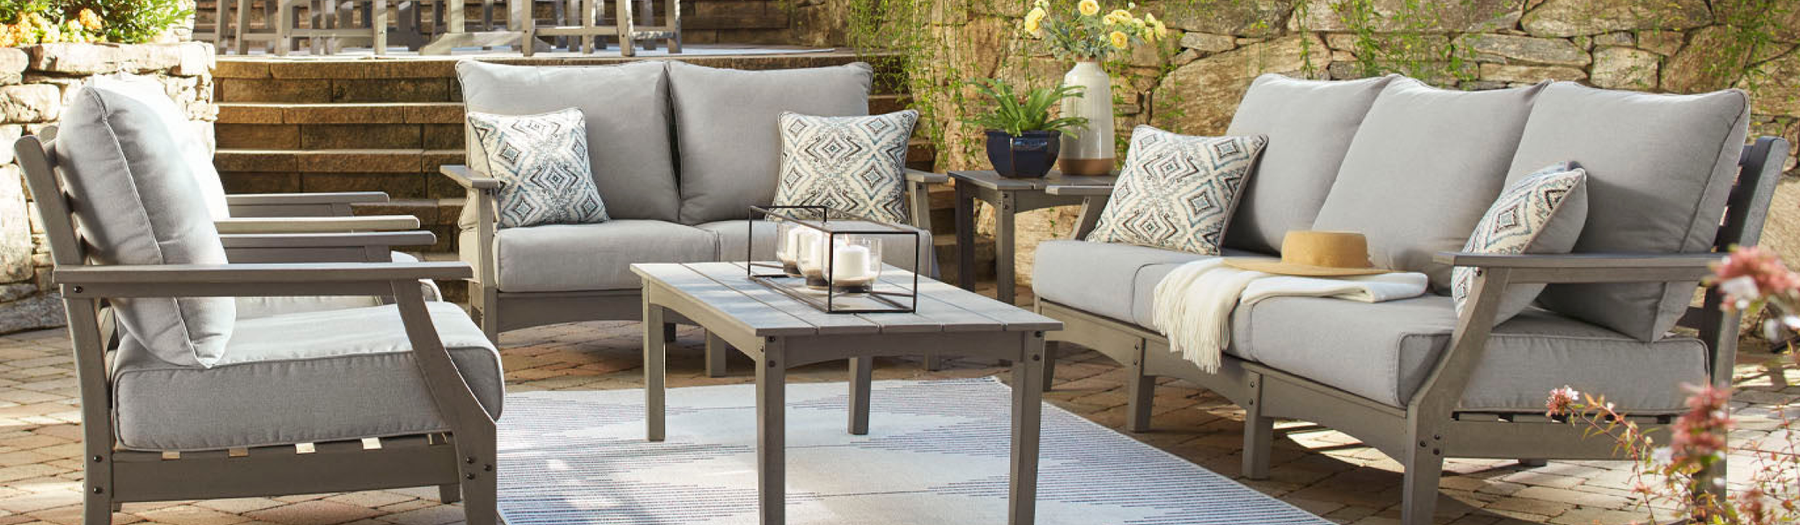 The Value of Outdoor Furniture - Investing in Quality and Price